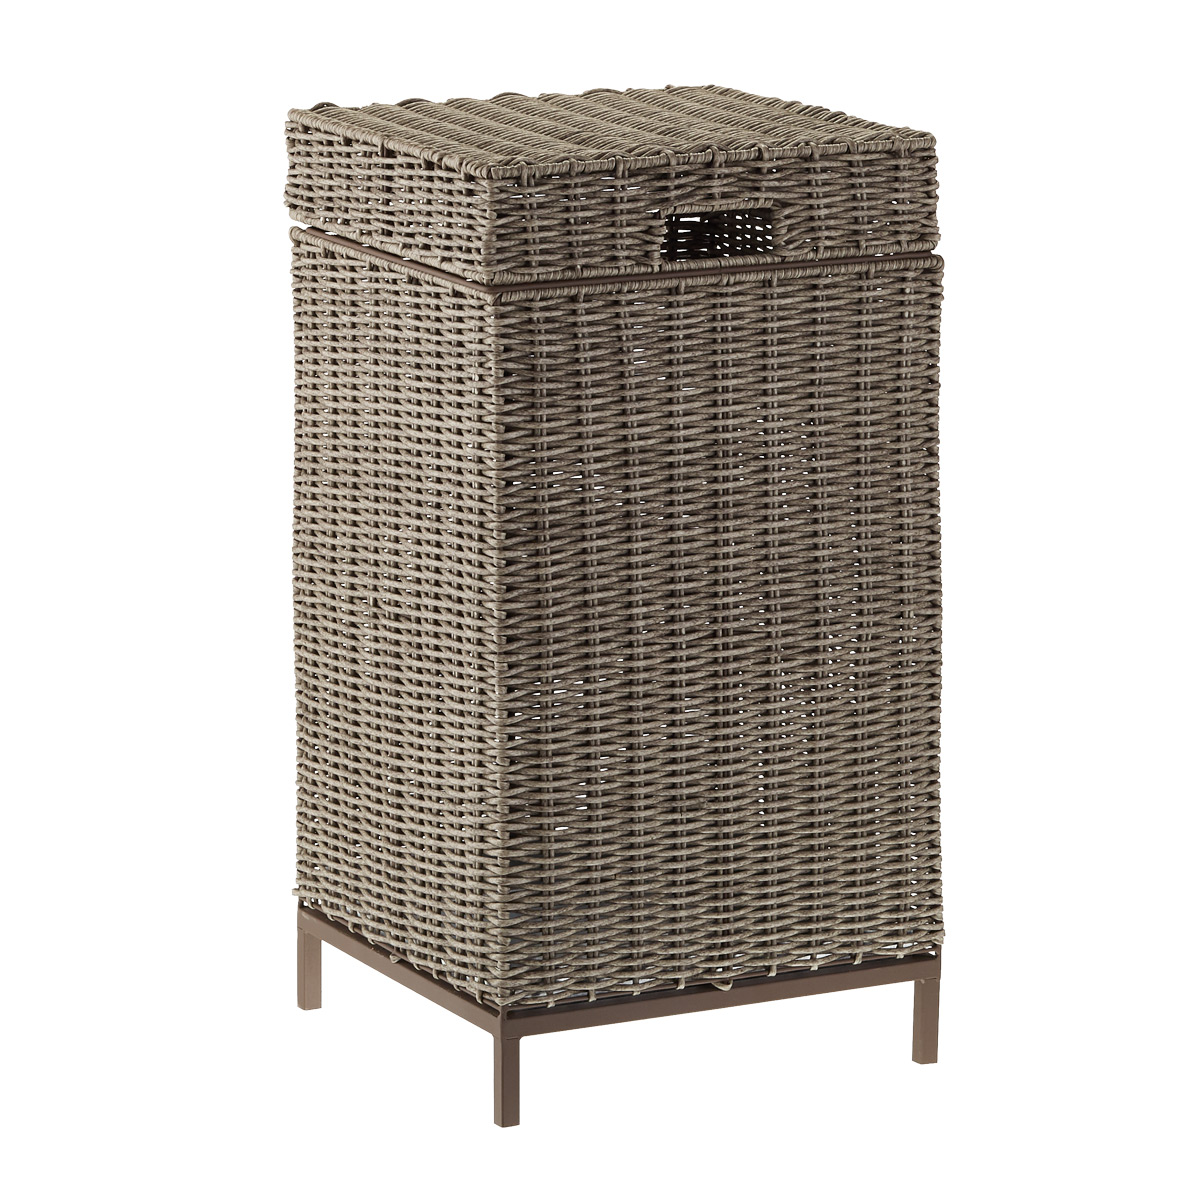 https://www.containerstore.com/catalogimages/417650/10083719-65L-outdoor-trash-can-grey-.jpg